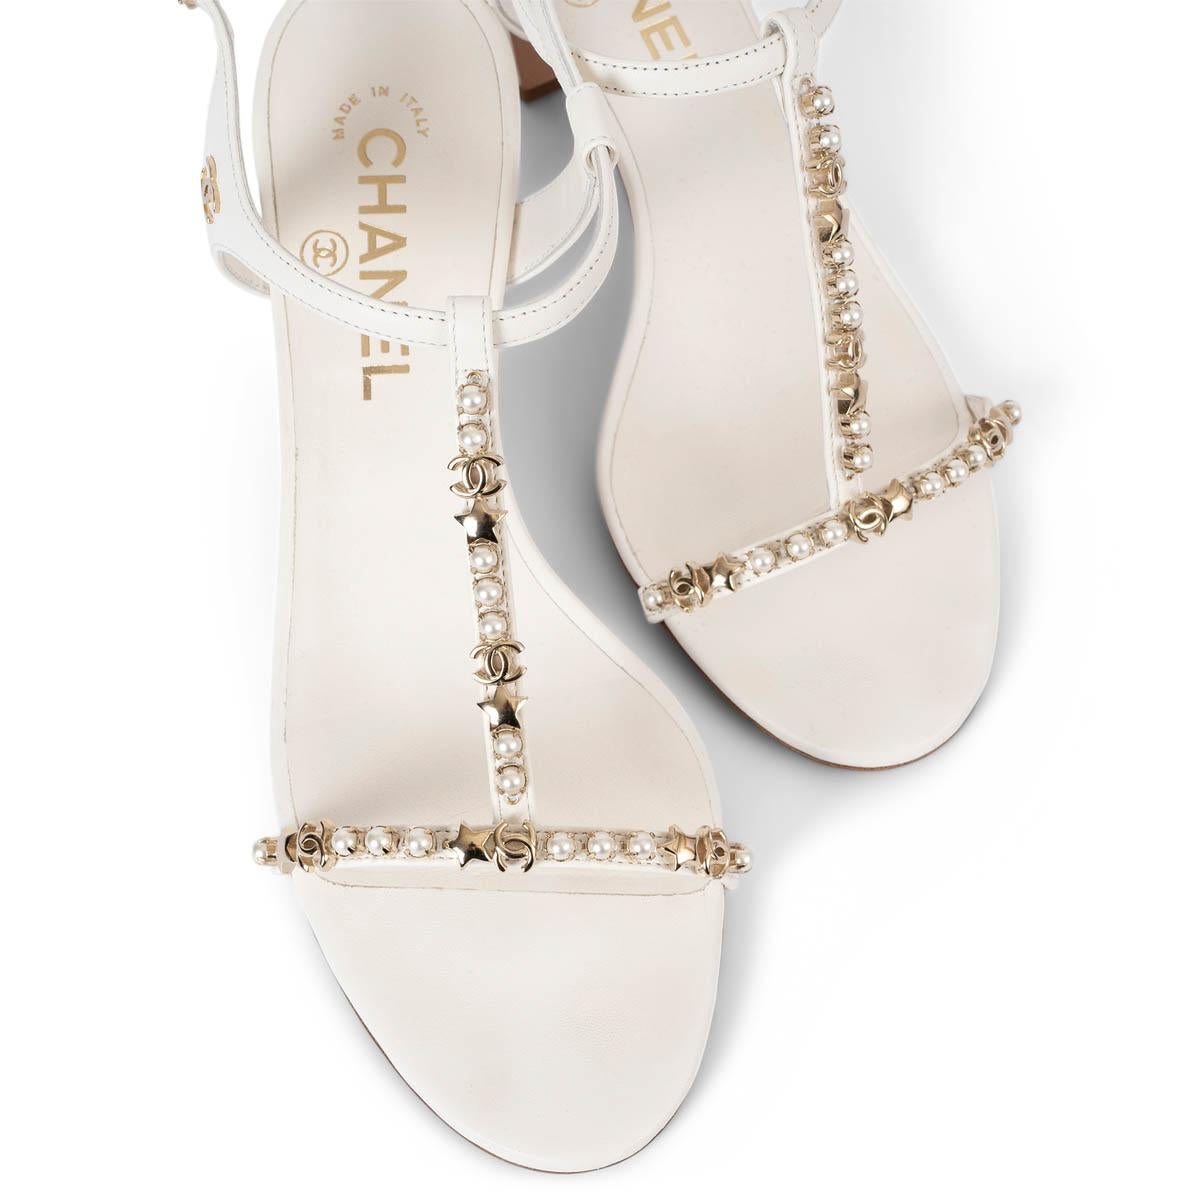 CHANEL white leather 2020 20S PEARL T-STRAP Sandals Shoes 38.5 3